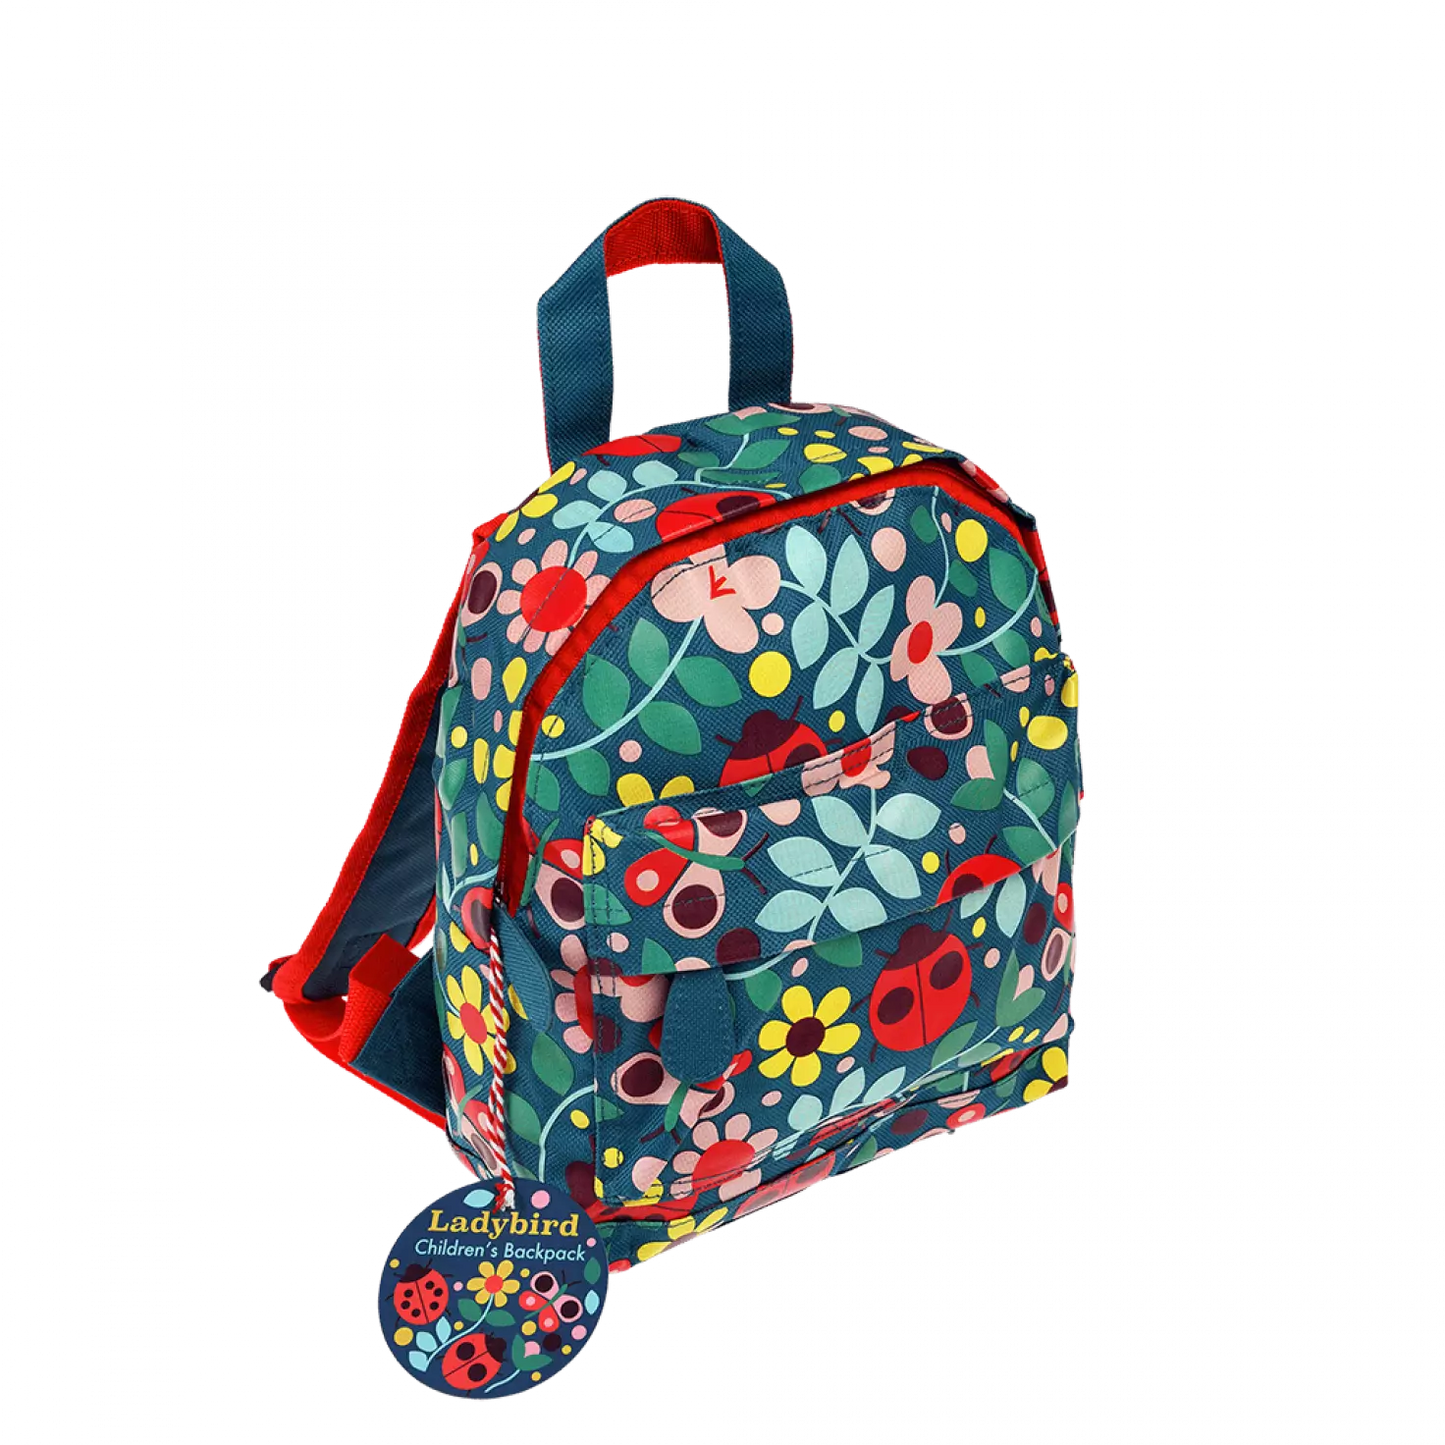 A childs backpack by Rex London, style Ladybird, in blue with multi ladybird and floral print. Two compartments with zip fastening. Angled view.